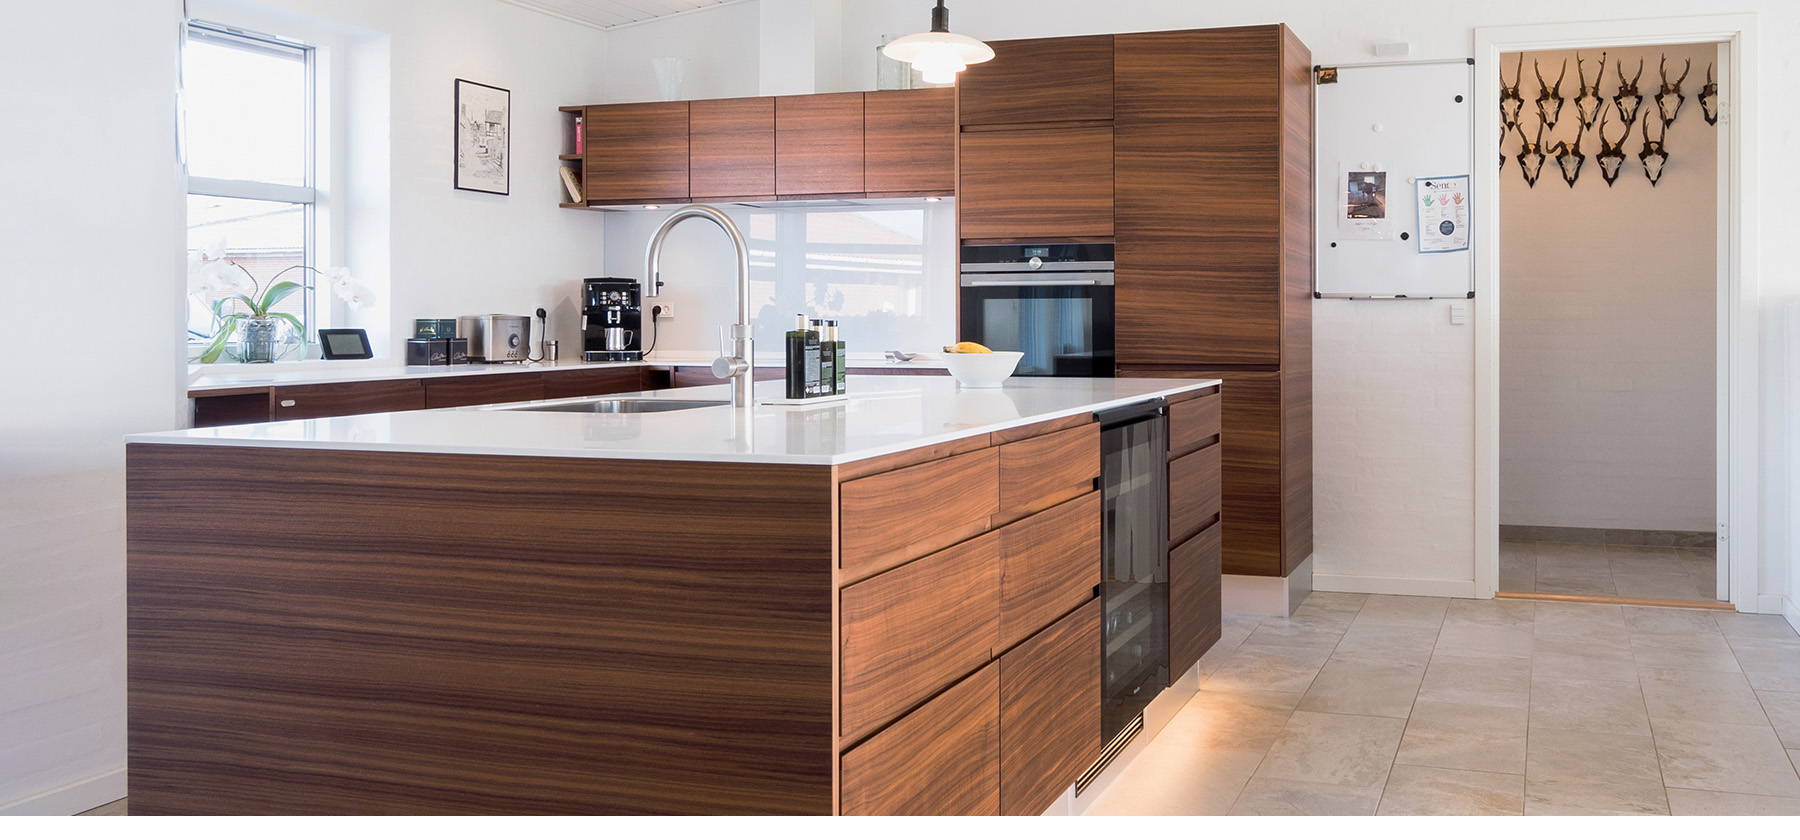 New kitchenWITH WOOD MATERIALS <br> AND WOW FACTOR